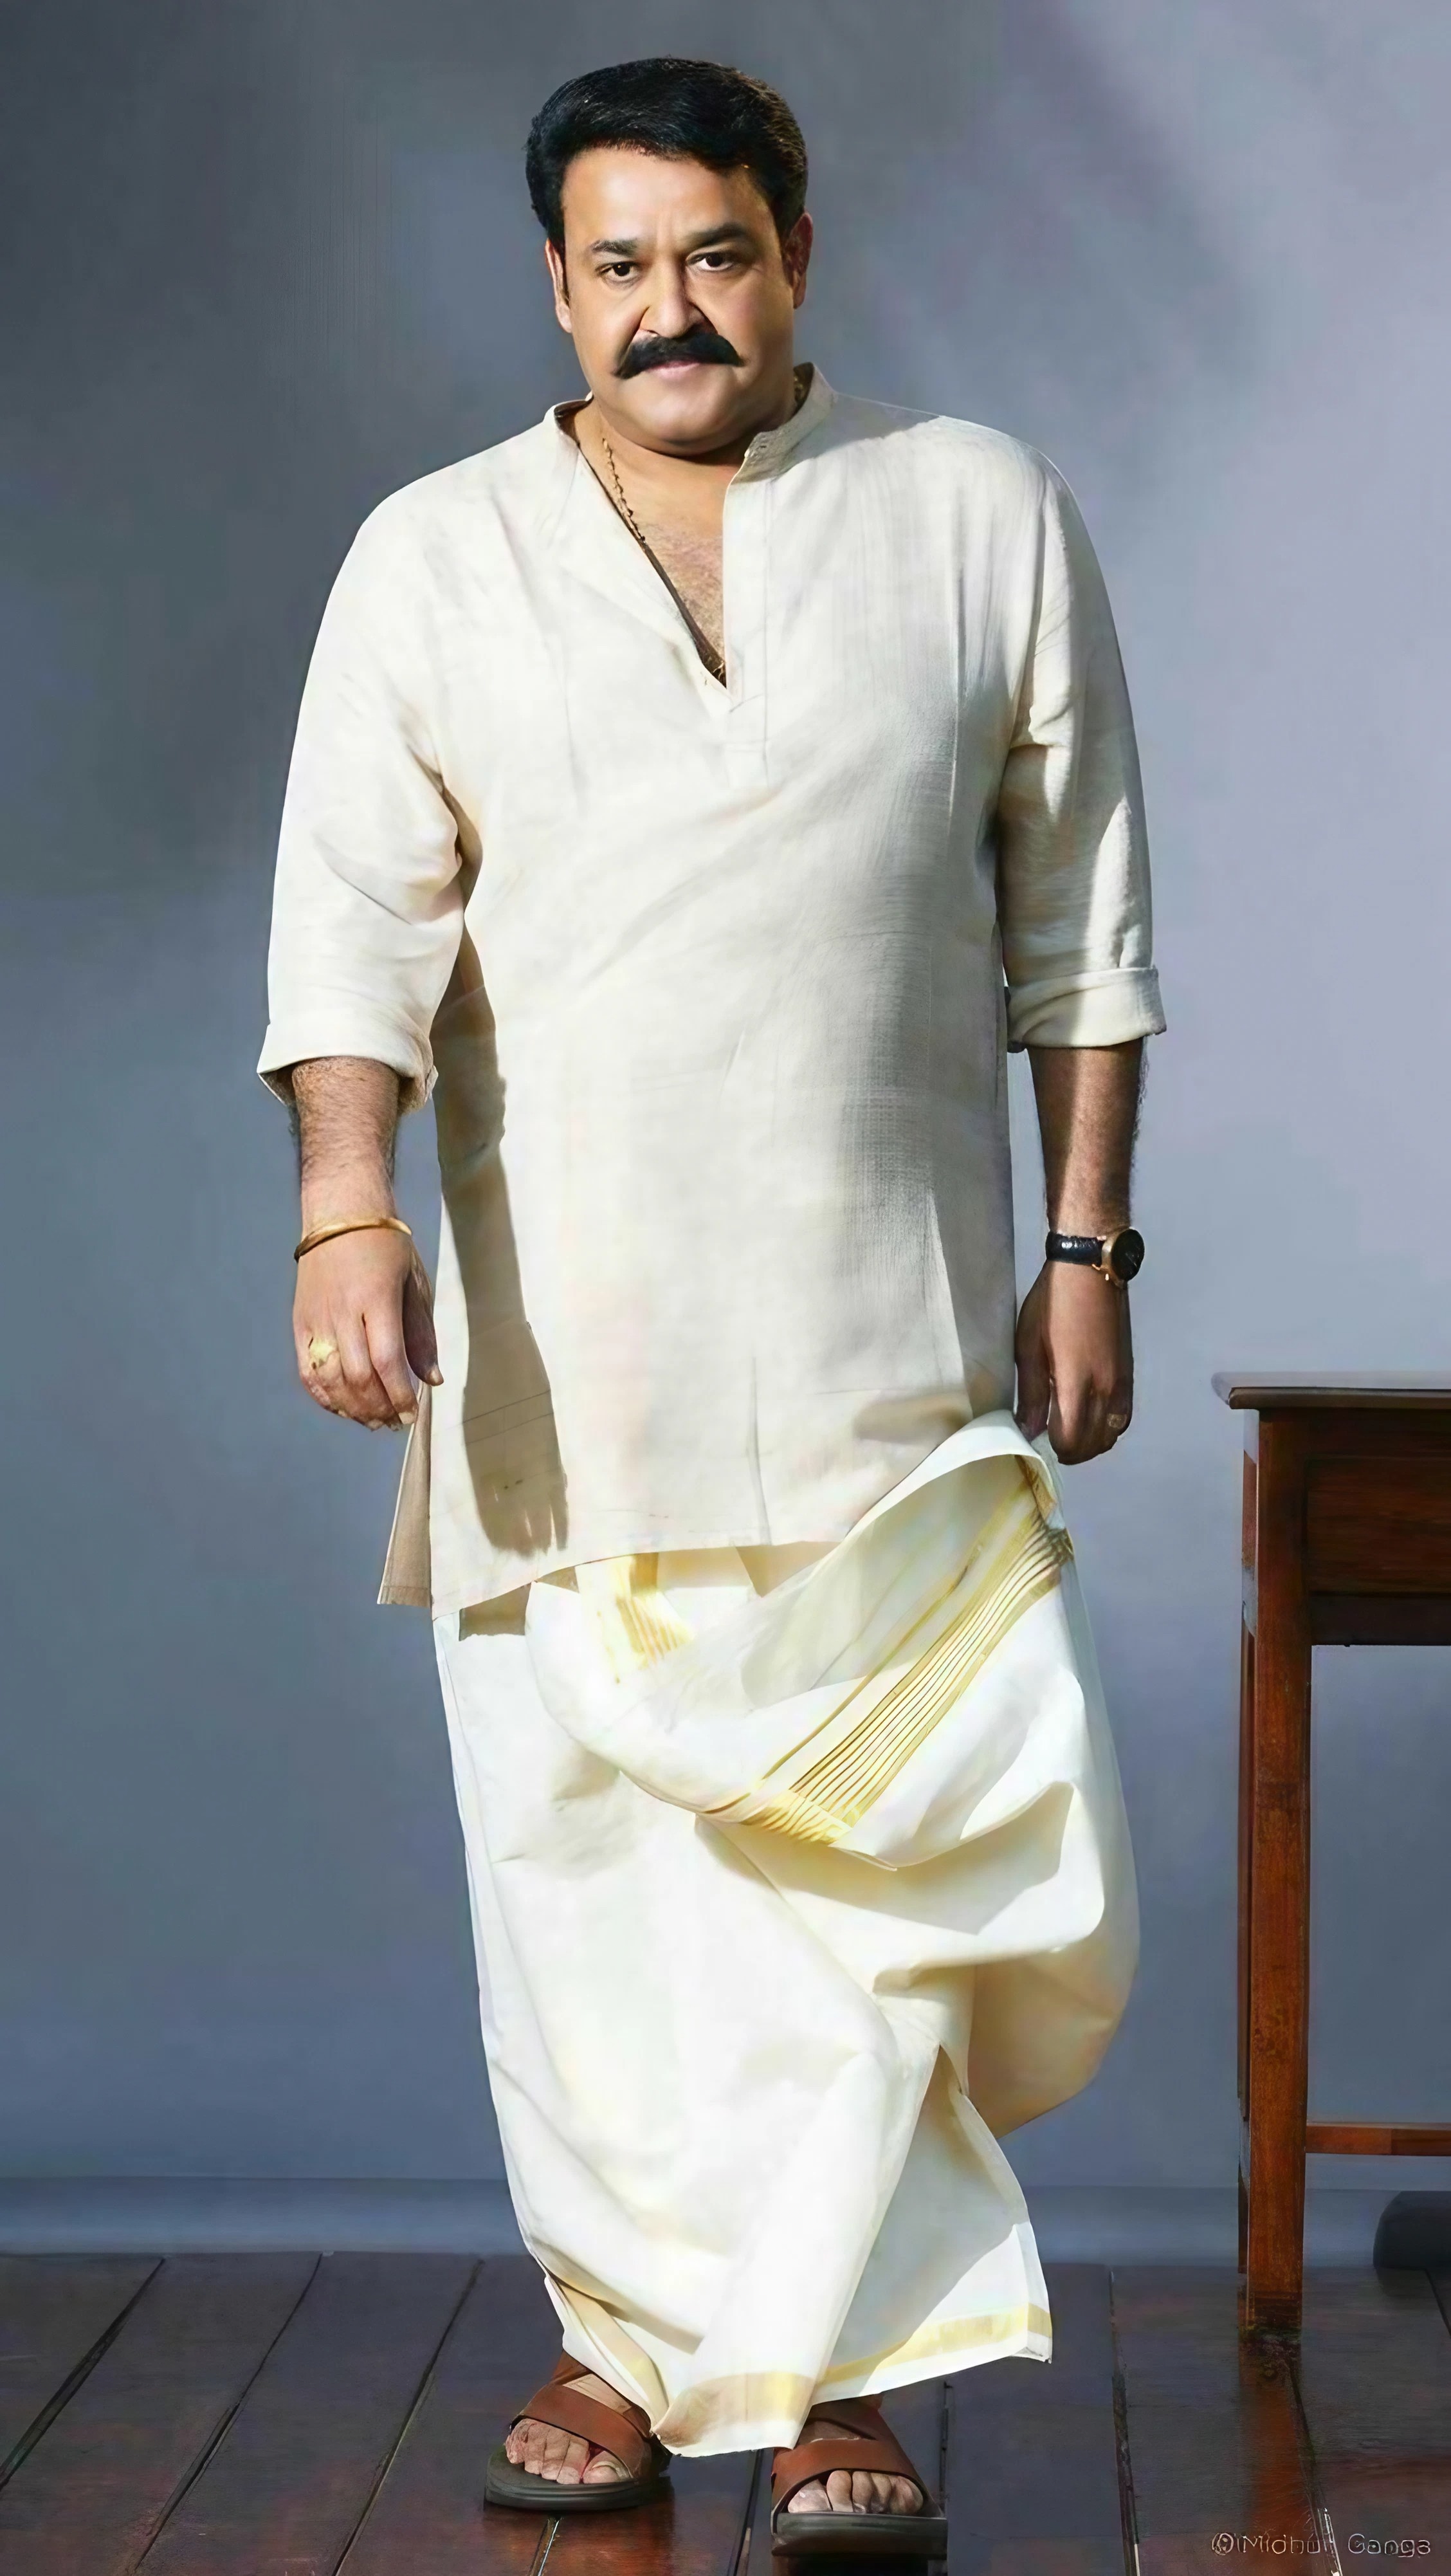 Tamil Style - Mohanlal in lungi